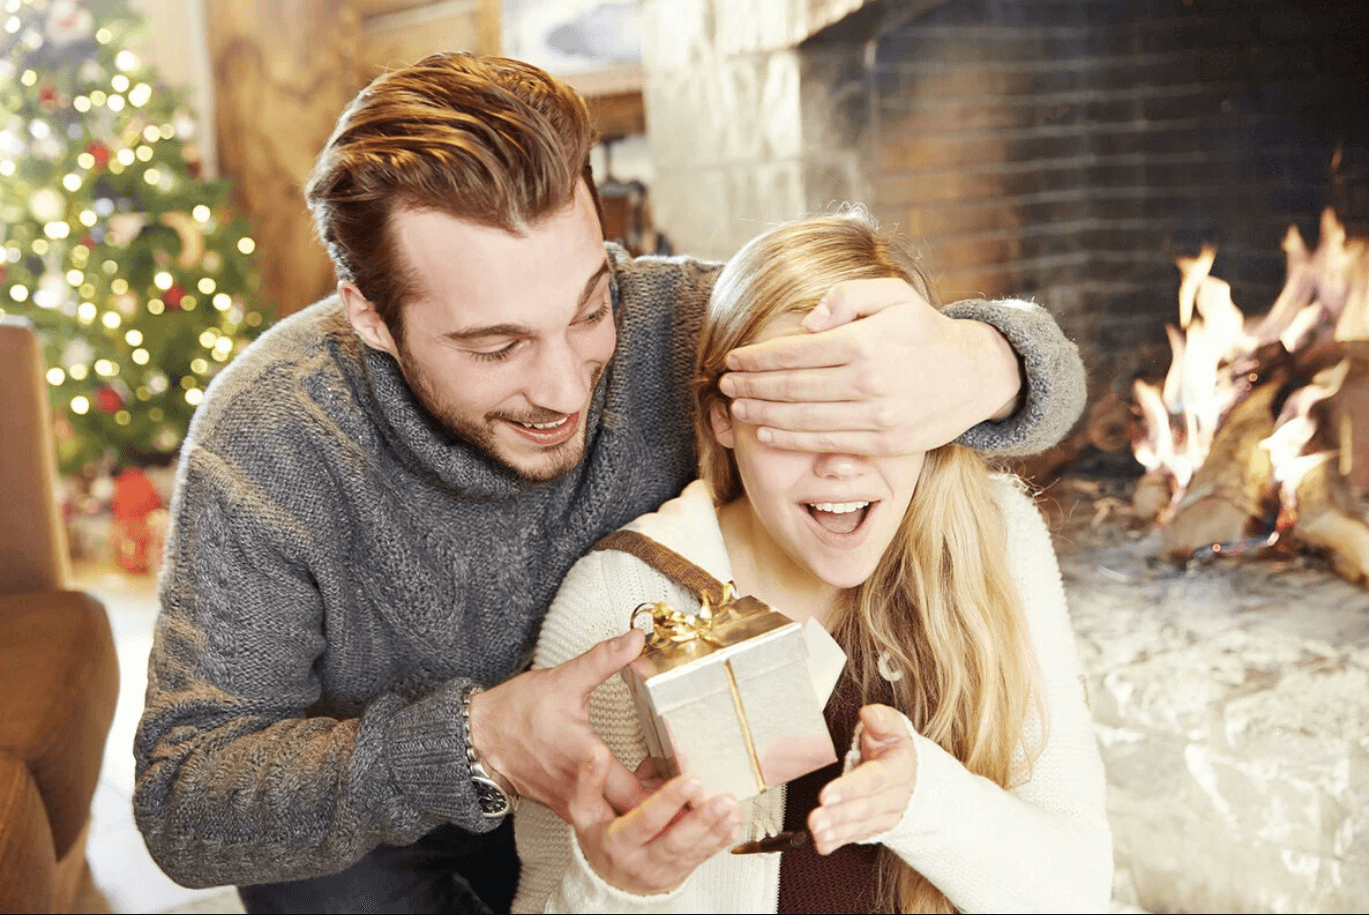 The Fascinating History of Christmas Gift-Giving